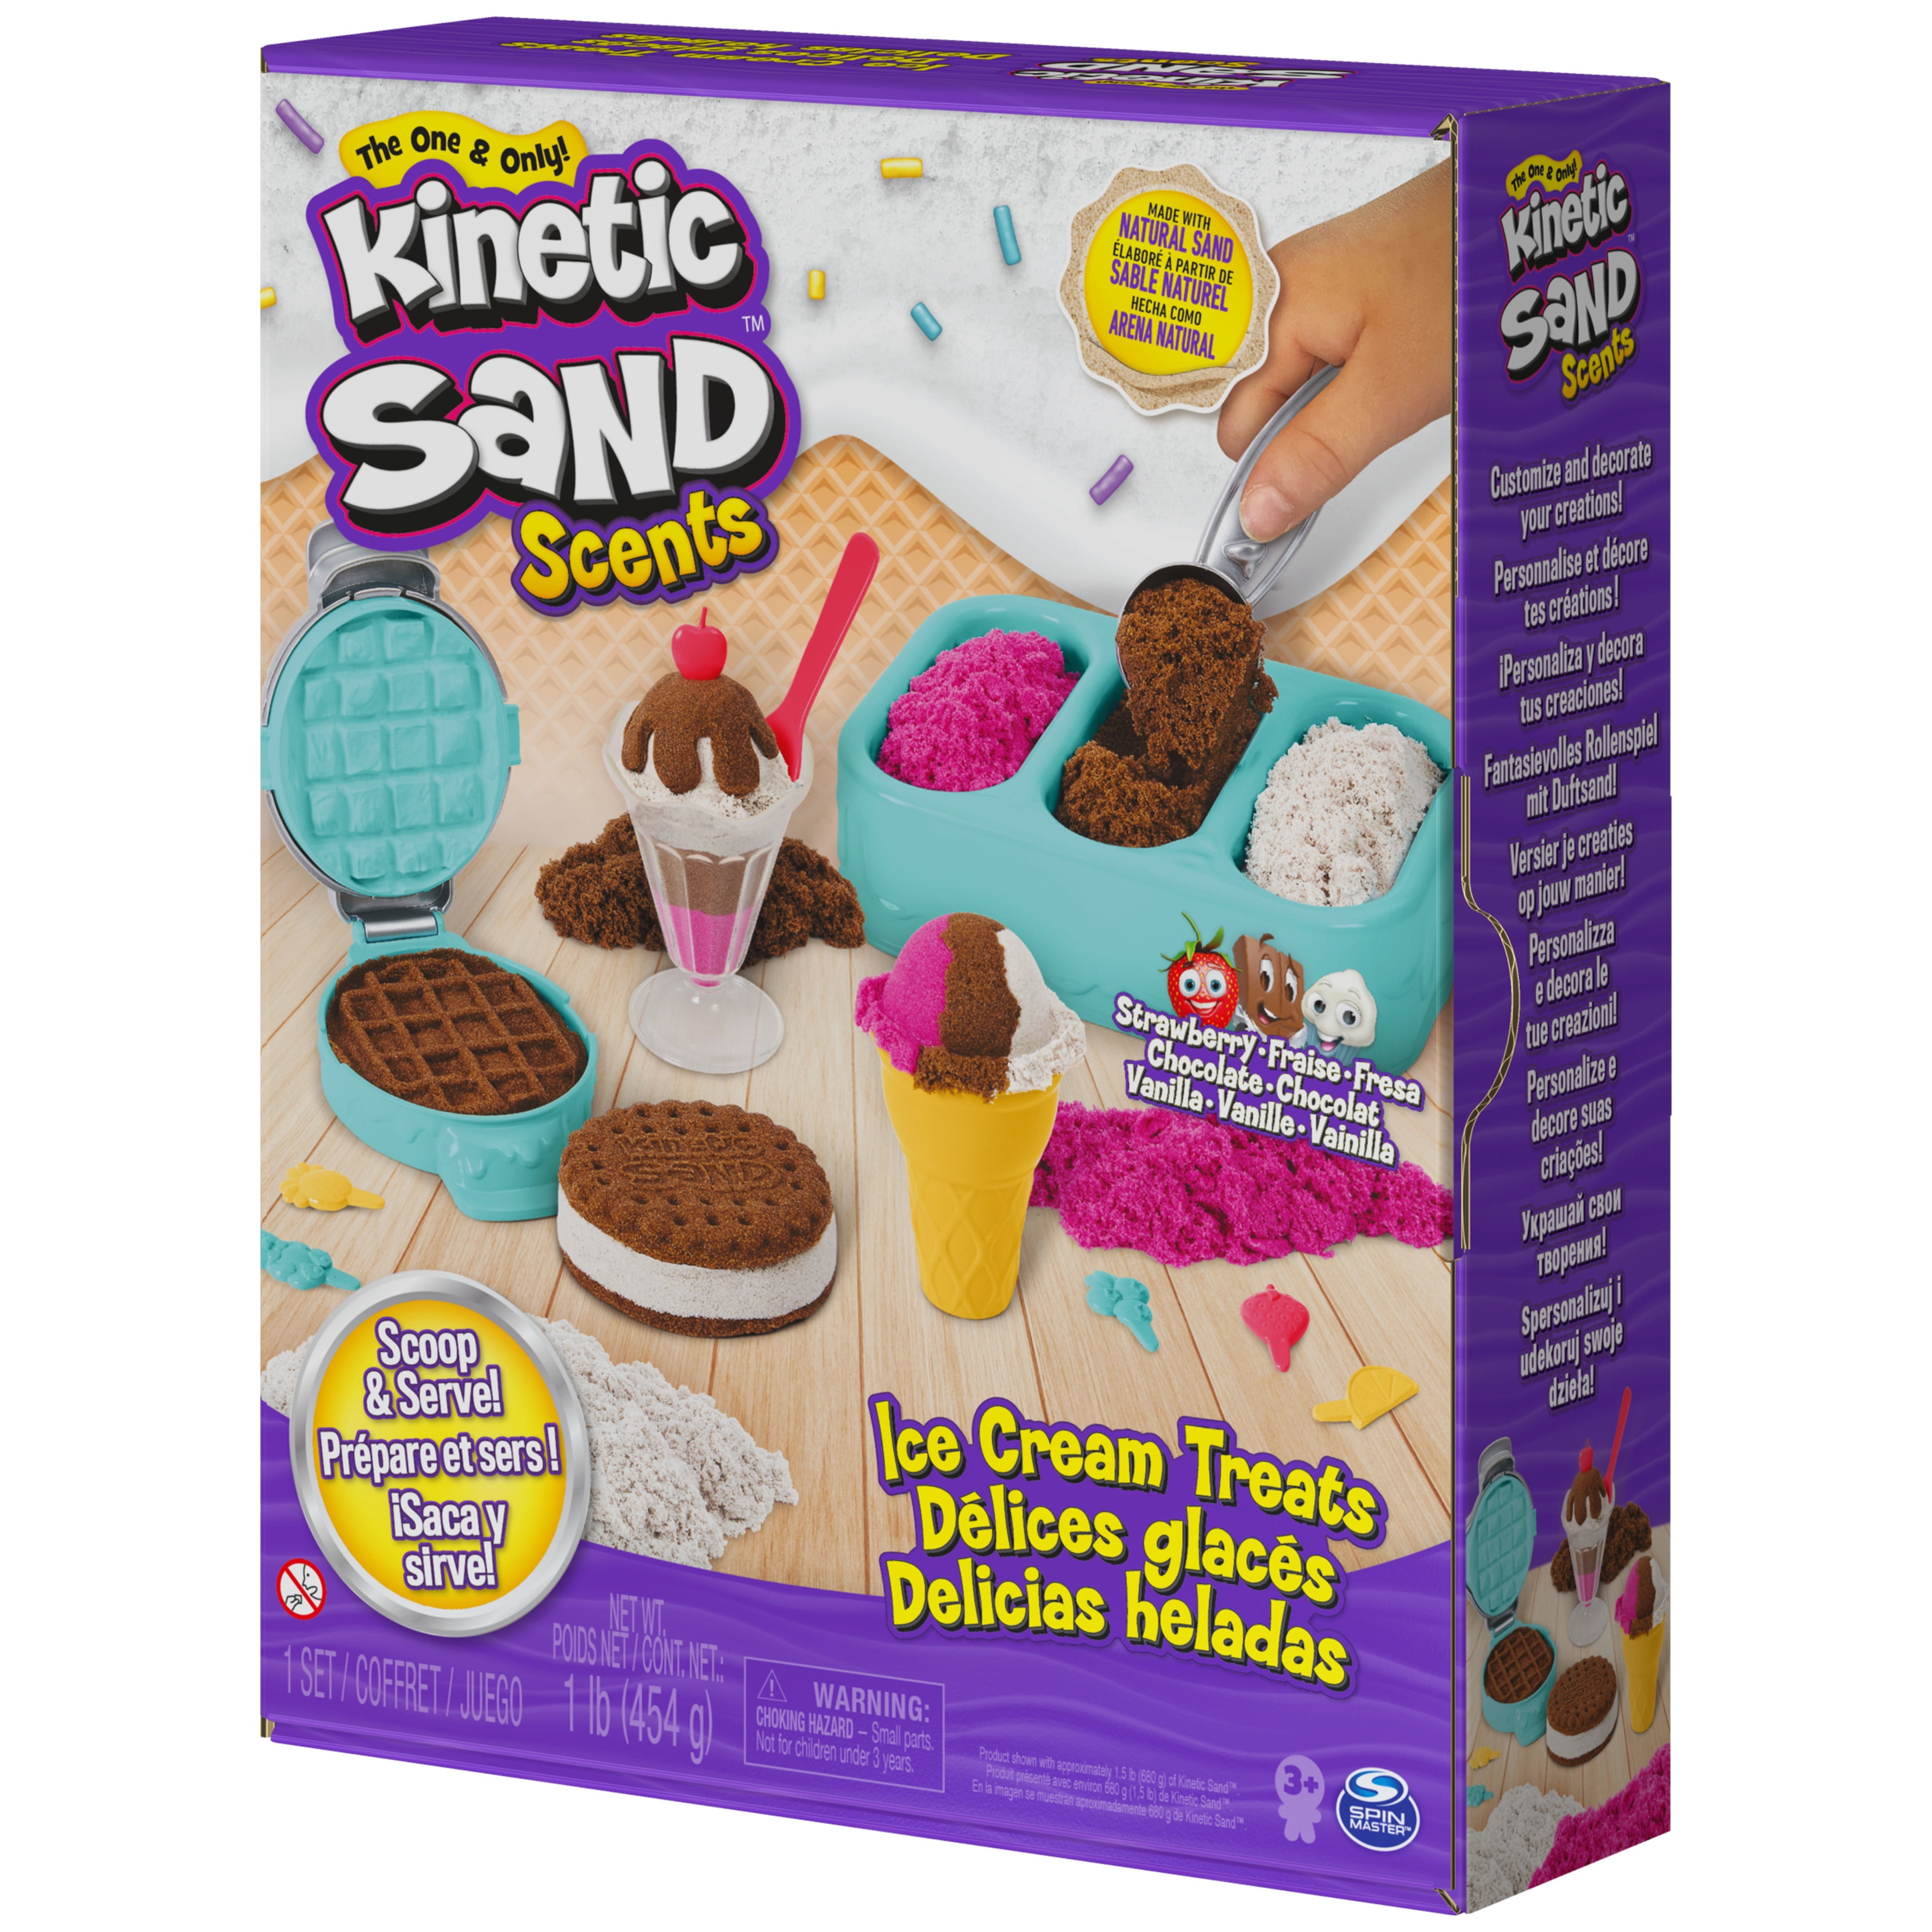 Kinetic Sand Scents Ice Cream Treats Playset 3 Colors 6 Serving Tools Jan.1,21 